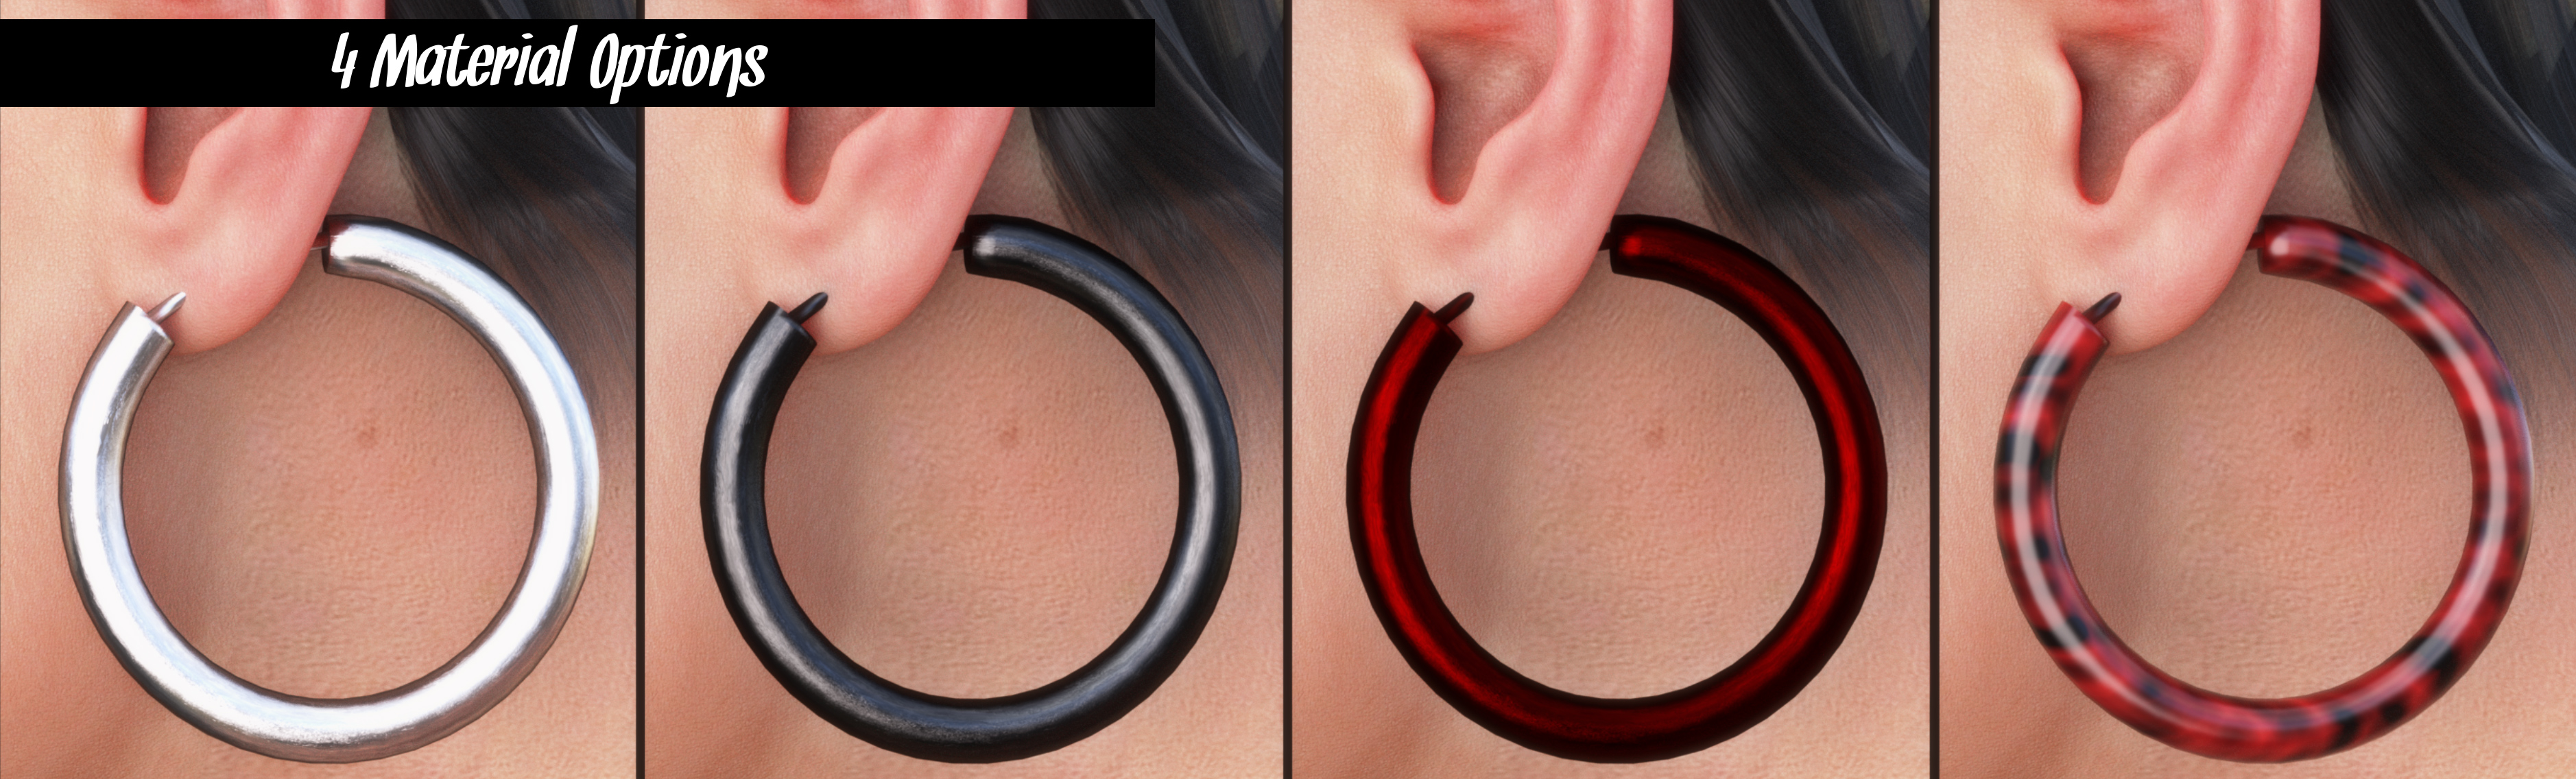 Devilish Piercing for Genesis 8 and 8.1 Males by: Neikdian, 3D Models by Daz 3D